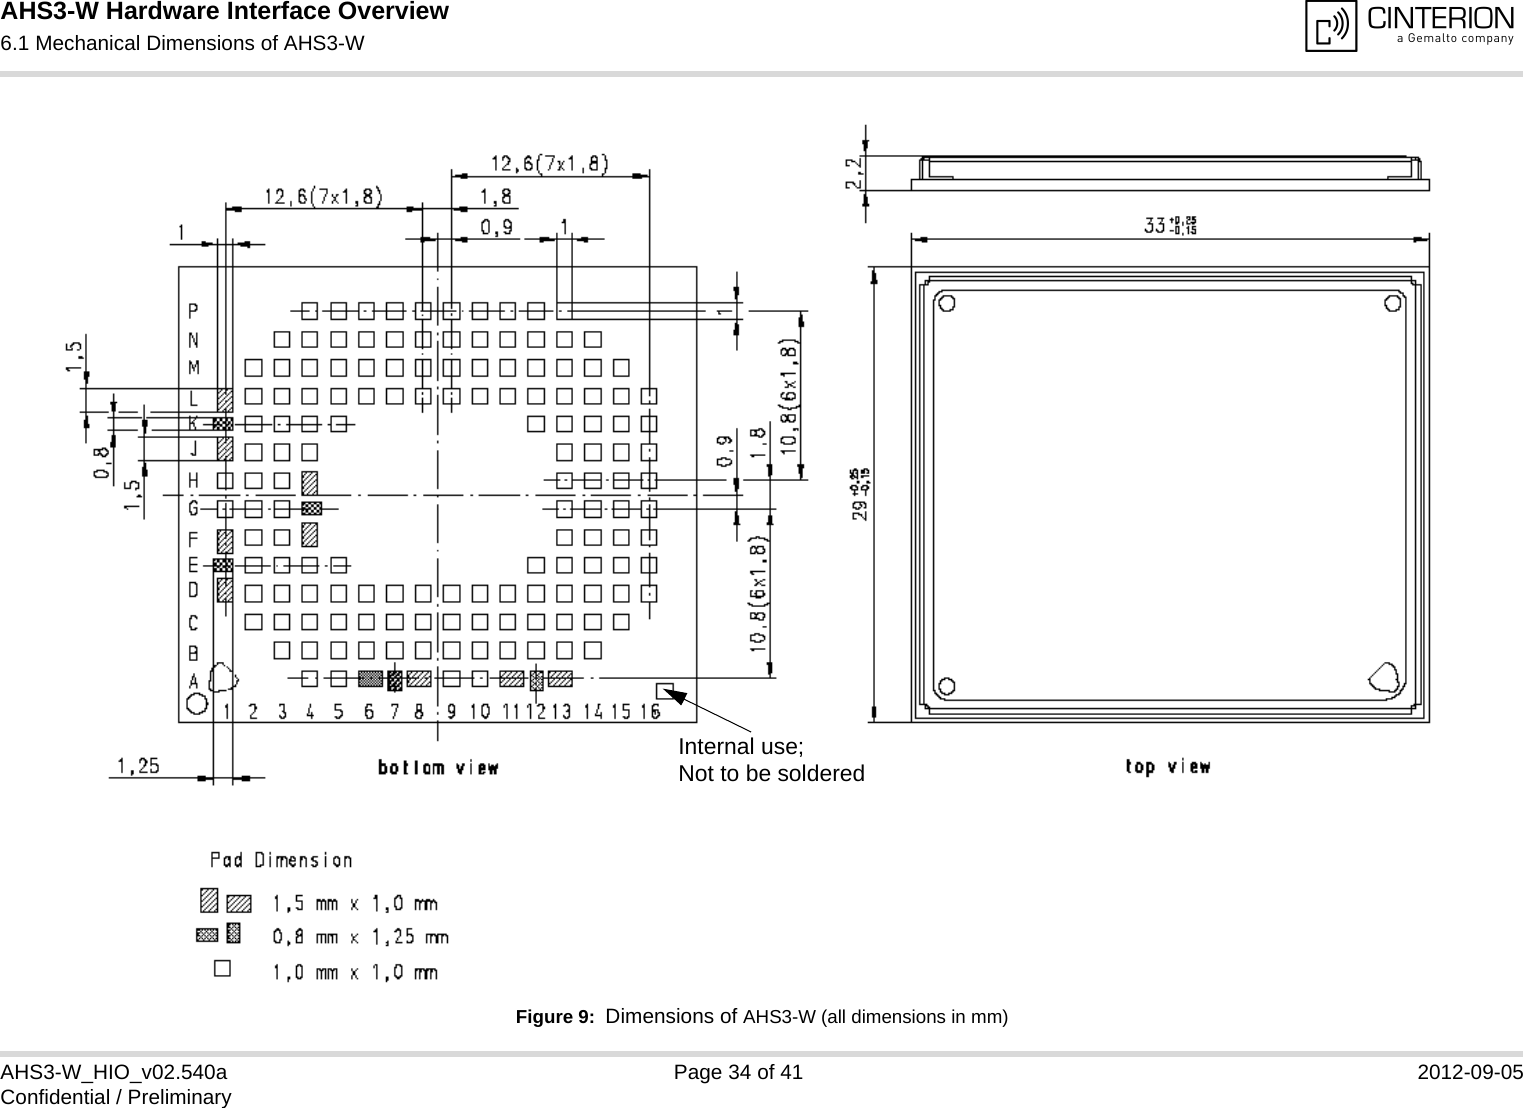 AHS3-W Hardware Interface Overview6.1 Mechanical Dimensions of AHS3-W34AHS3-W_HIO_v02.540a Page 34 of 41 2012-09-05Confidential / PreliminaryFigure 9:  Dimensions of AHS3-W (all dimensions in mm)Internal use; Not to be soldered